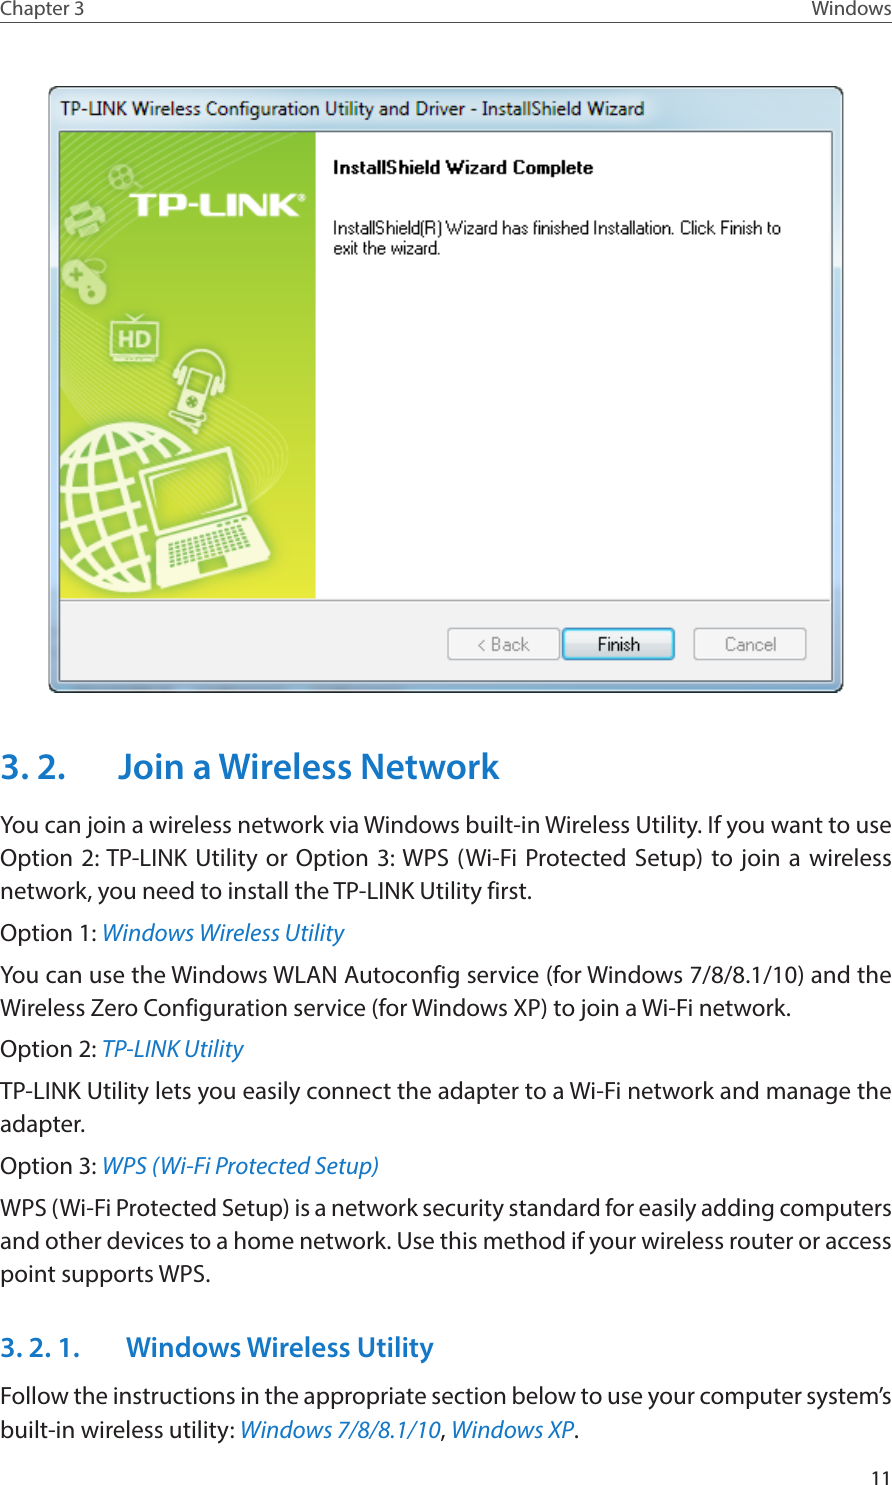 11Chapter 3 Windows3. 2.  Join a Wireless NetworkYou can join a wireless network via Windows built-in Wireless Utility. If you want to use Option 2: TP-LINK Utility or Option 3: WPS (Wi-Fi Protected Setup) to join a wireless network, you need to install the TP-LINK Utility first.Option 1: Windows Wireless UtilityYou can use the Windows WLAN Autoconfig service (for Windows 7/8/8.1/10) and the Wireless Zero Configuration service (for Windows XP) to join a Wi-Fi network.Option 2: TP-LINK UtilityTP-LINK Utility lets you easily connect the adapter to a Wi-Fi network and manage the adapter. Option 3: WPS (Wi-Fi Protected Setup)WPS (Wi-Fi Protected Setup) is a network security standard for easily adding computers and other devices to a home network. Use this method if your wireless router or access point supports WPS.3. 2. 1.   Windows Wireless UtilityFollow the instructions in the appropriate section below to use your computer system’s built-in wireless utility: Windows 7/8/8.1/10, Windows XP.